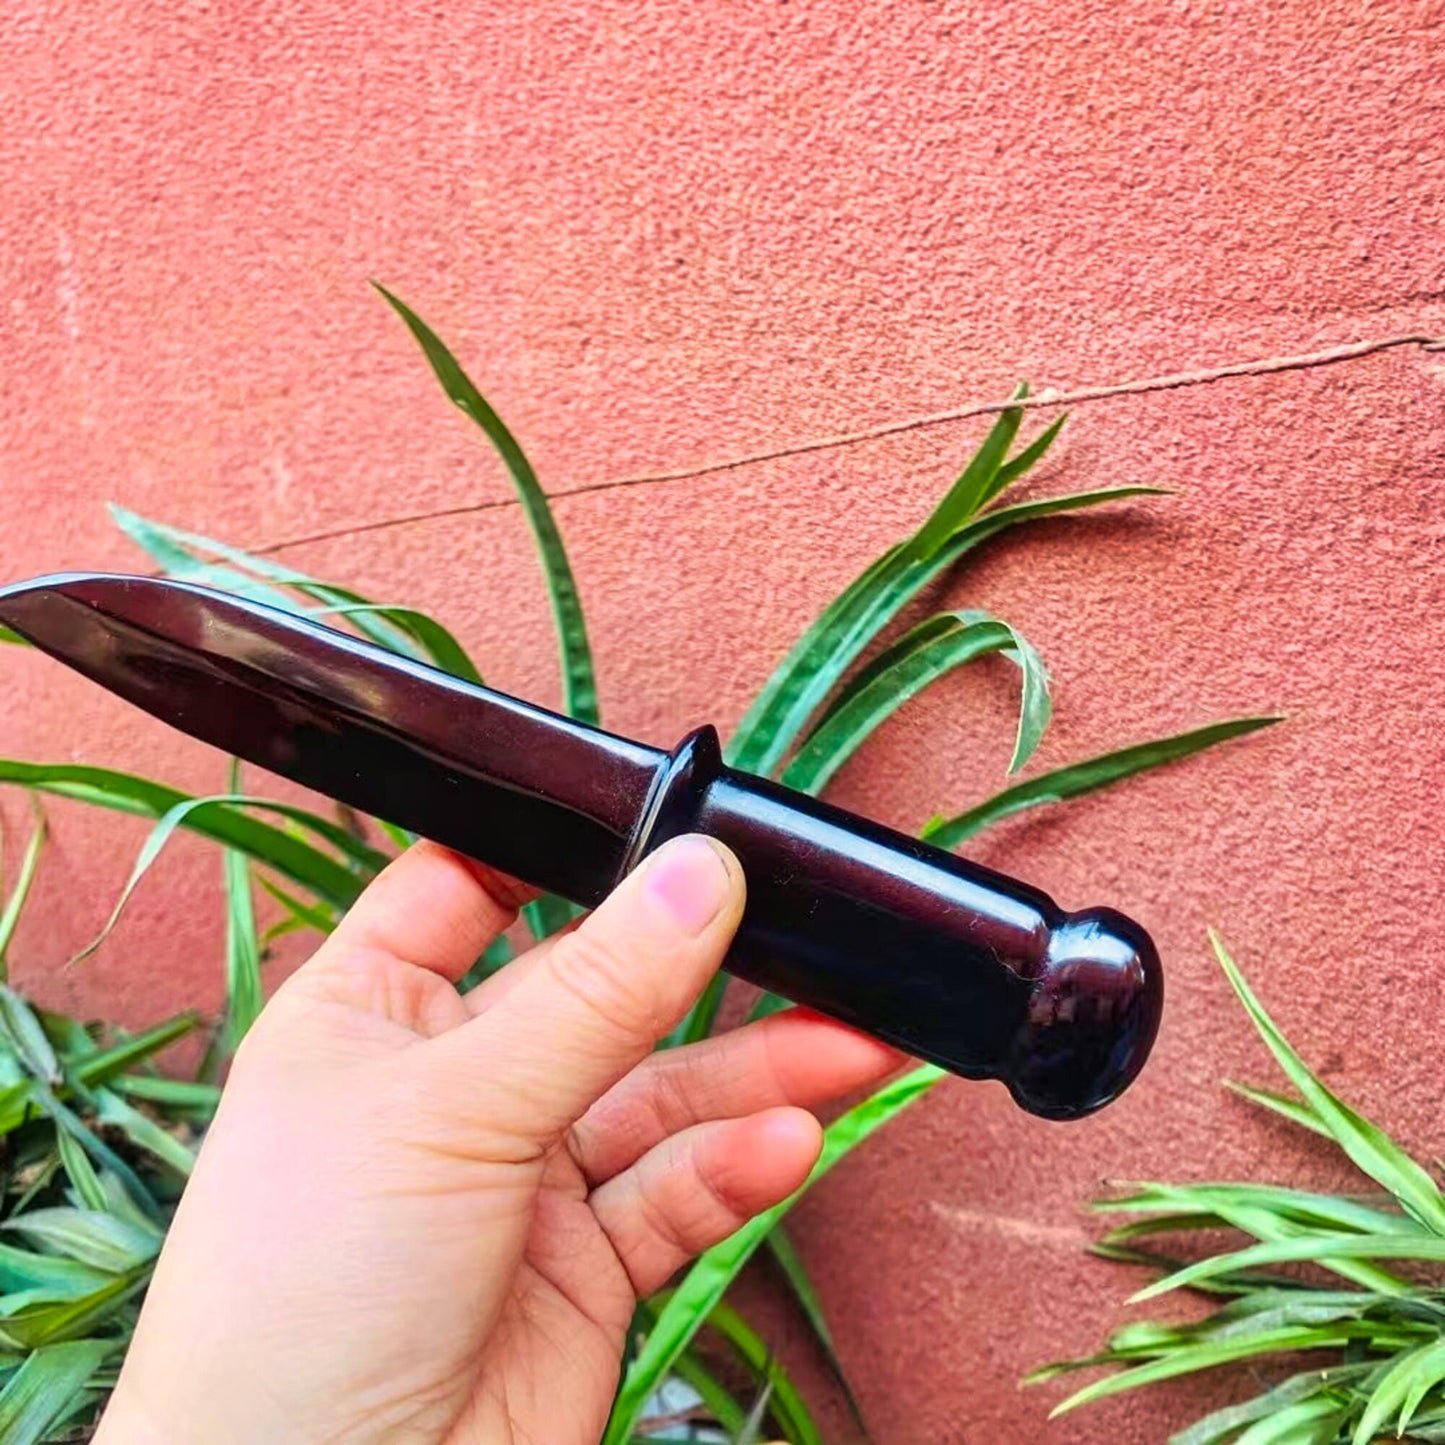 Handmade Natural Obsidian Dagger for Men - Healing Crystal Protection Stone, Magic Talisman Sword and Witch Supplies Ornaments Gift